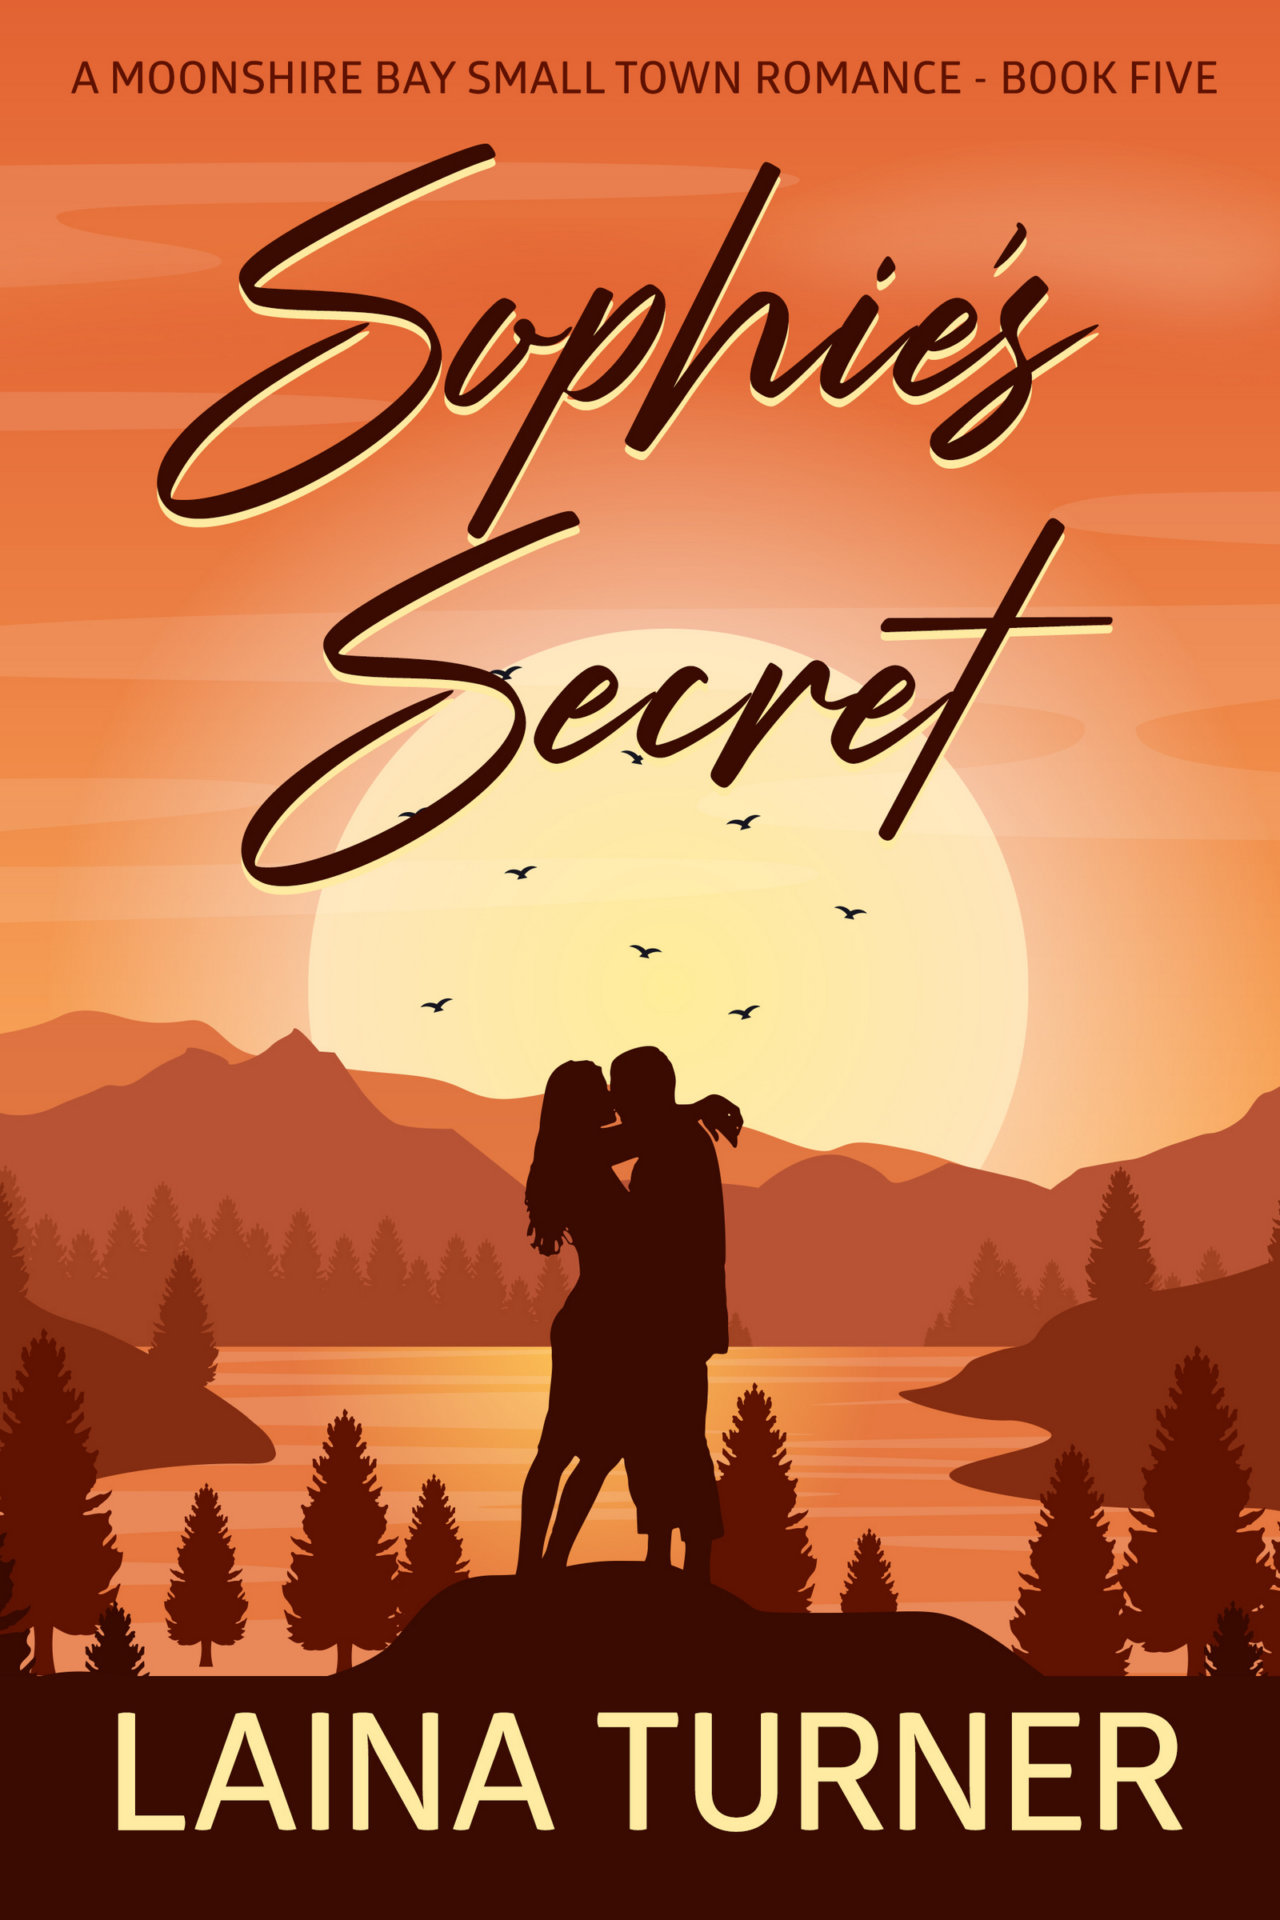 Sophie’s Secret – A Moonshire Bay Small Town Romance Book 5